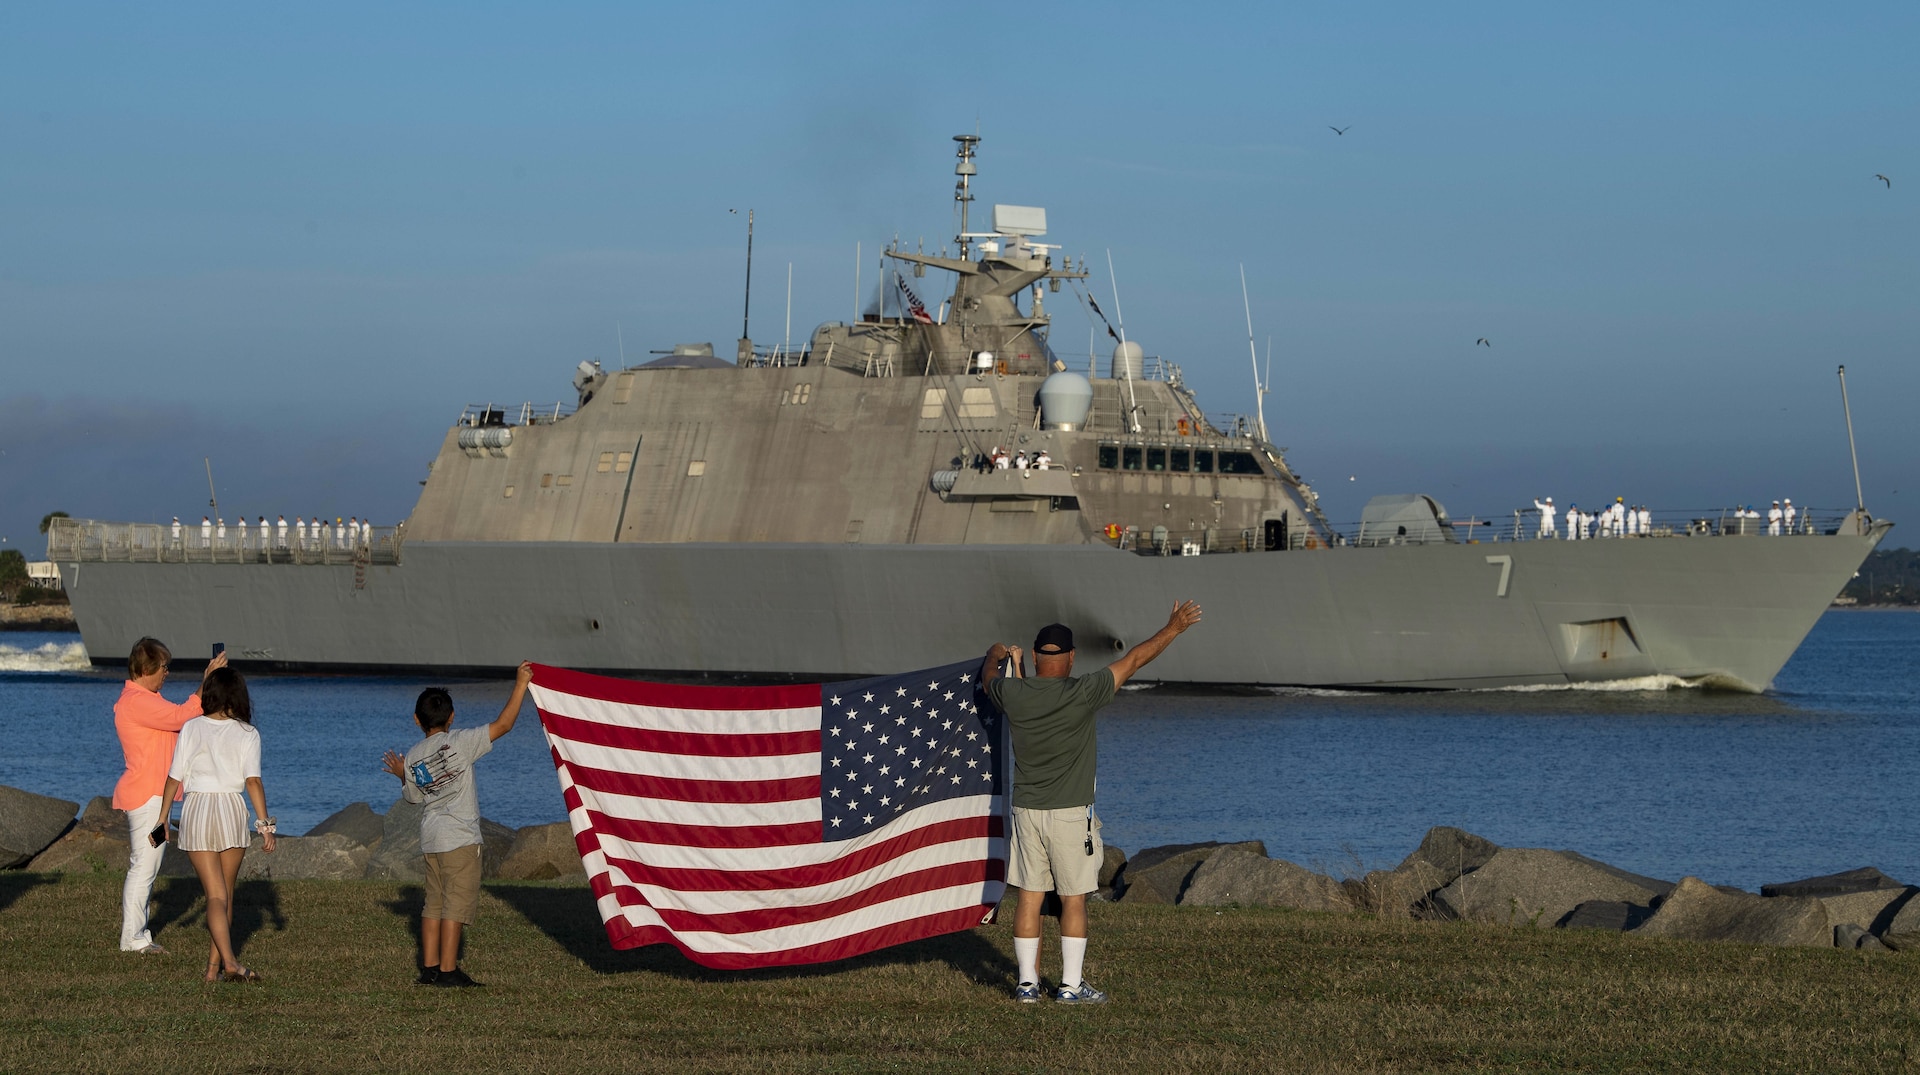 he Freedom-variant littoral combat ship USS Detroit departs Naval Station Mayport for a scheduled deployment.